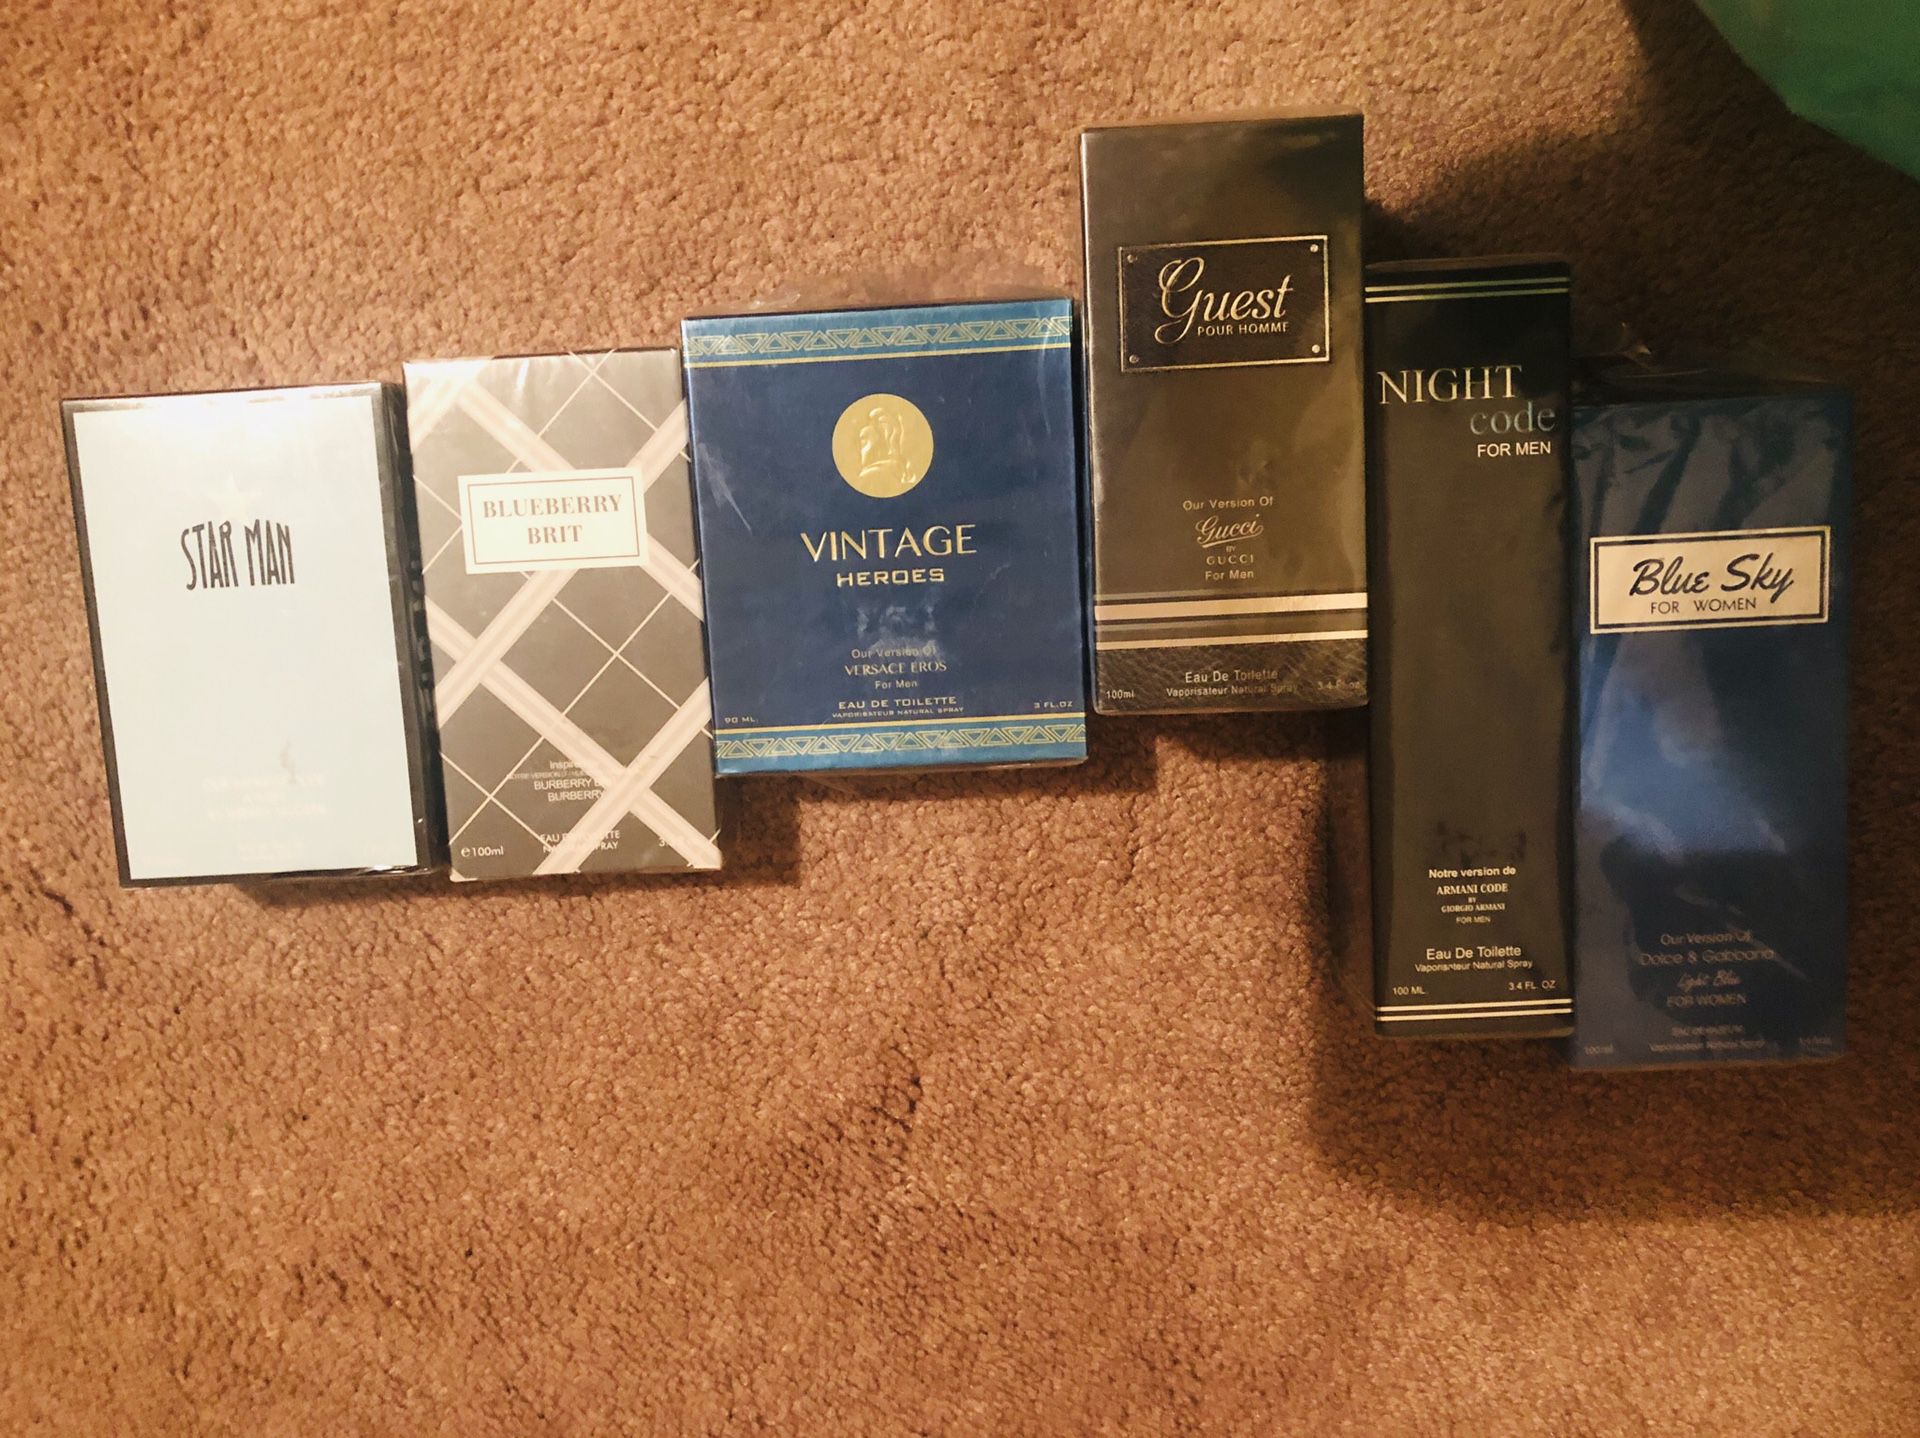 Colognes and perfume gifts present lot